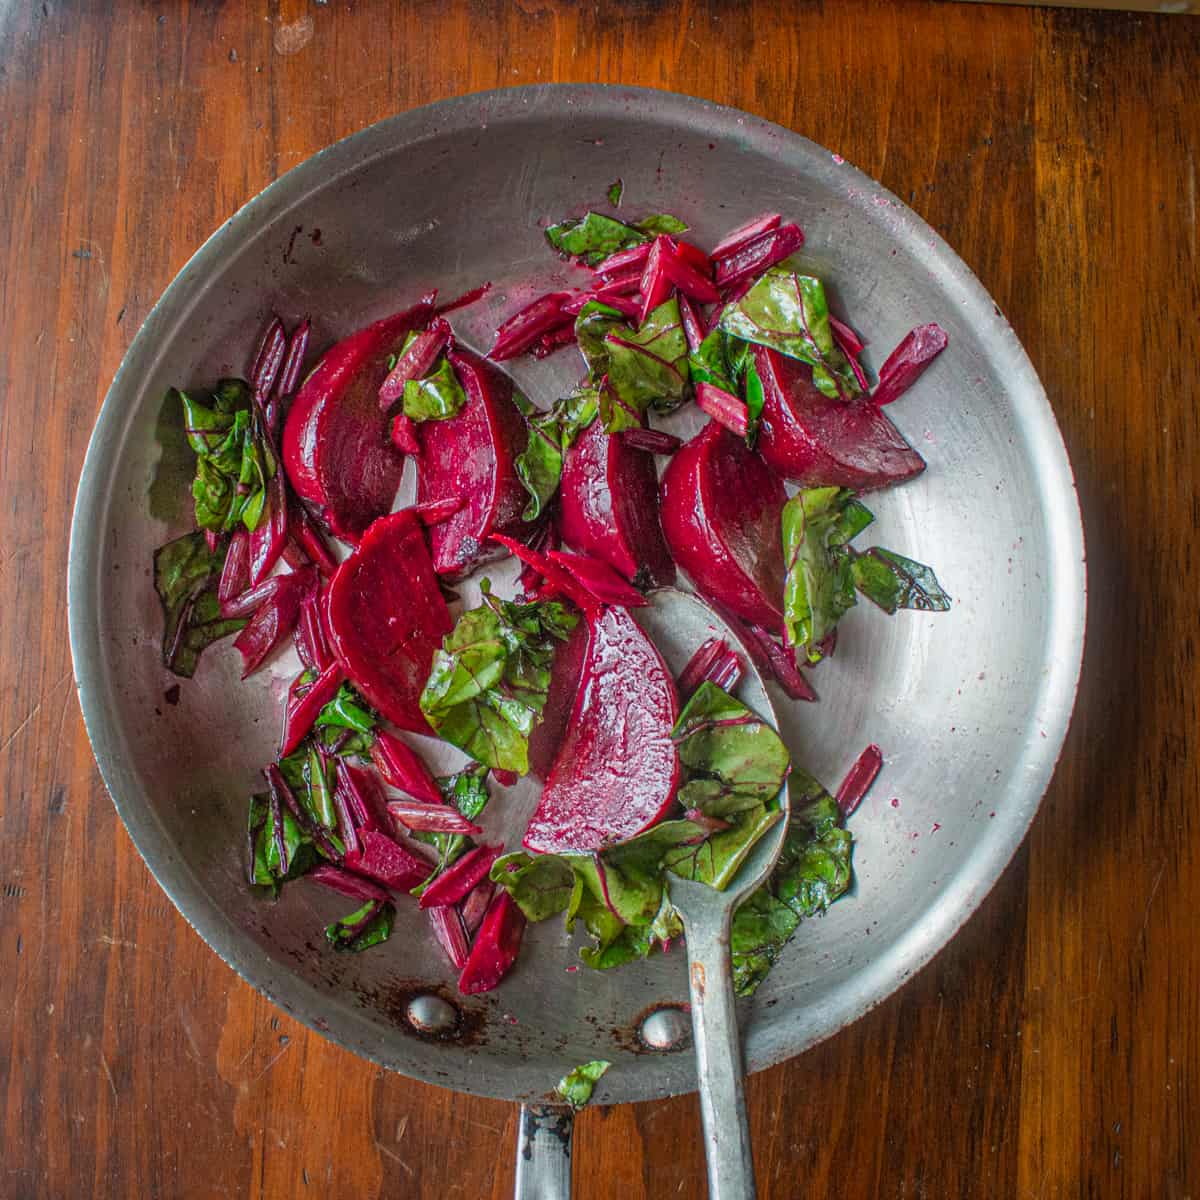 Roasted Beets, Their Leaves and Stems